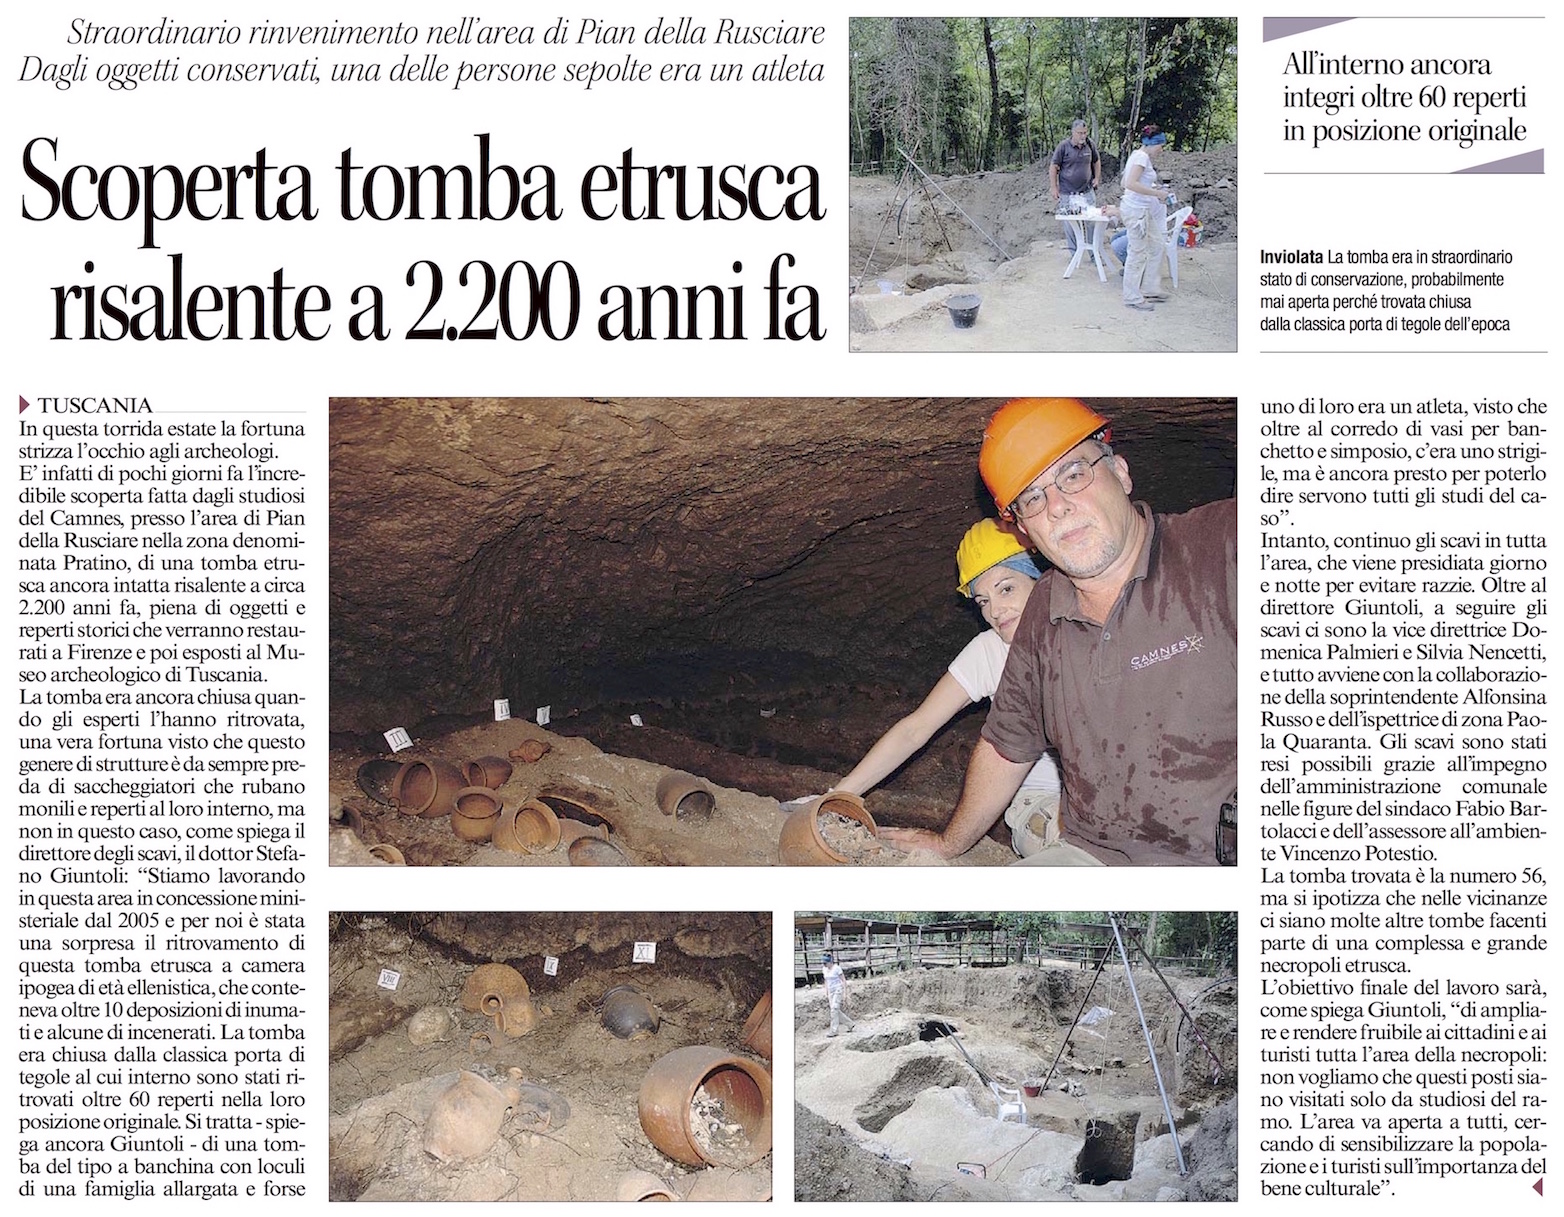 Discovered intact tomb in Tuscania